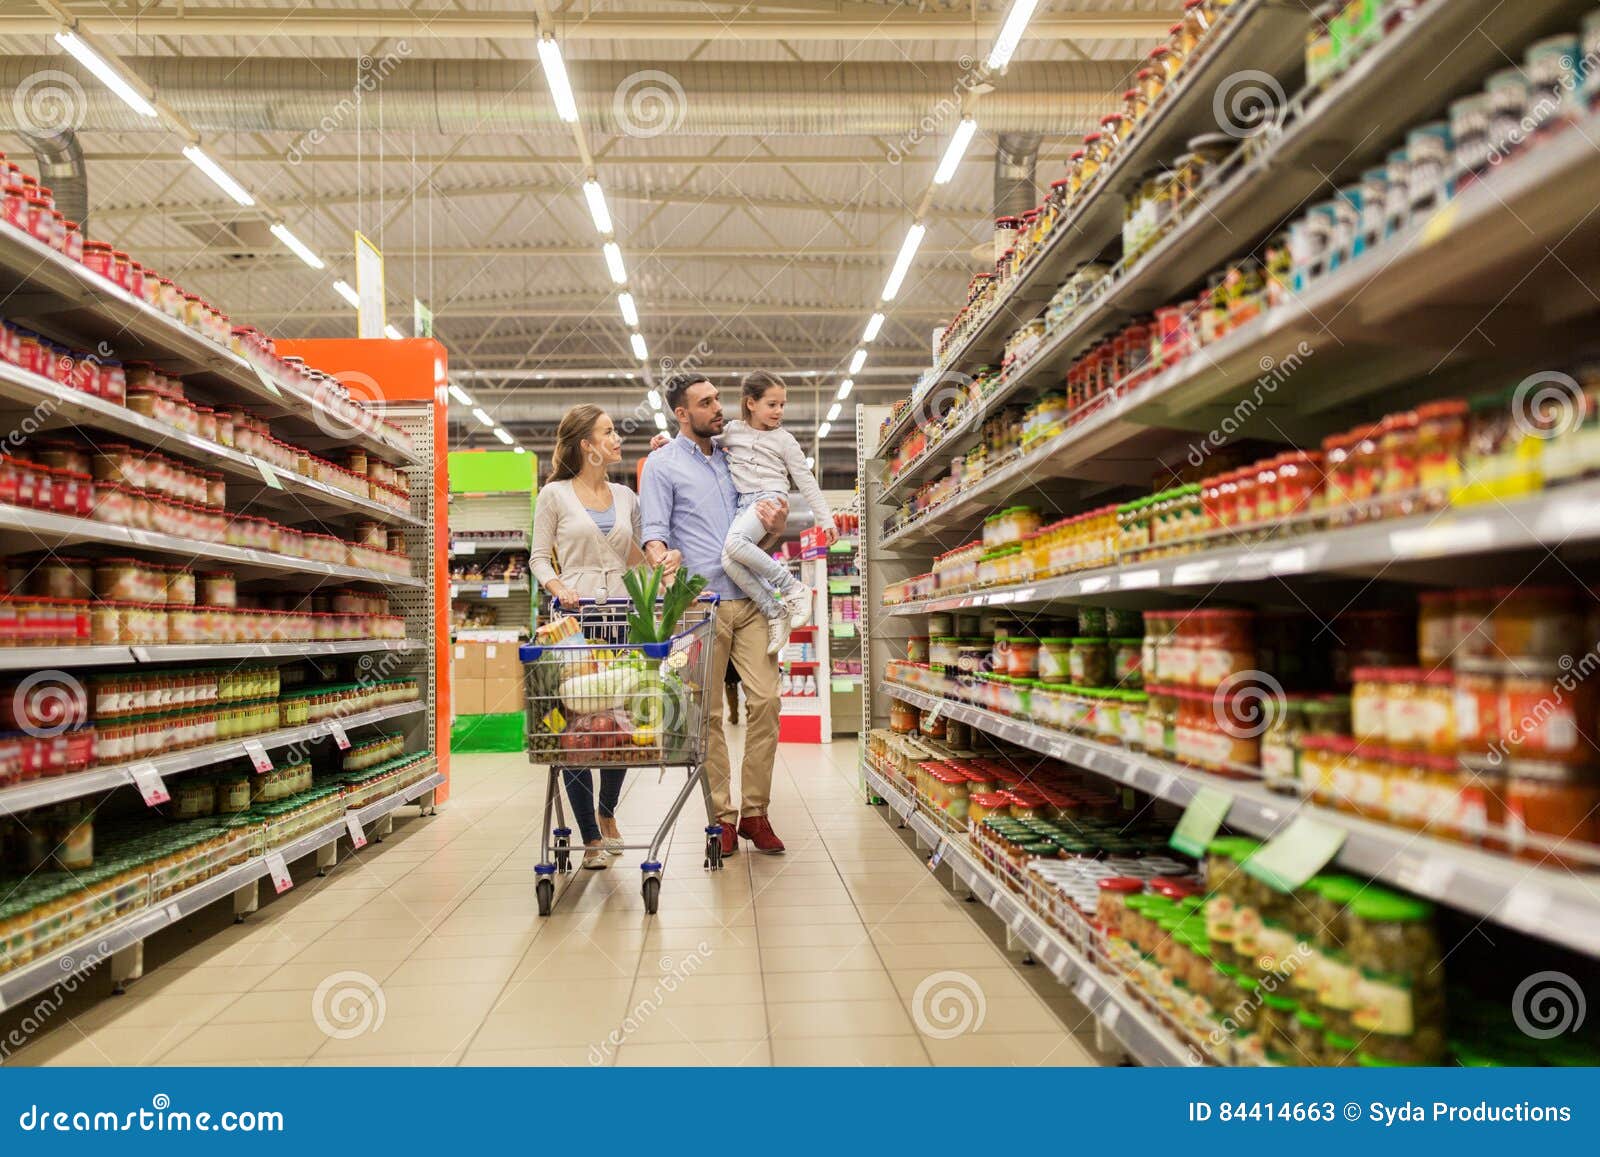 Family with Food in Shopping Cart at Grocery Store Stock Image - Image ...